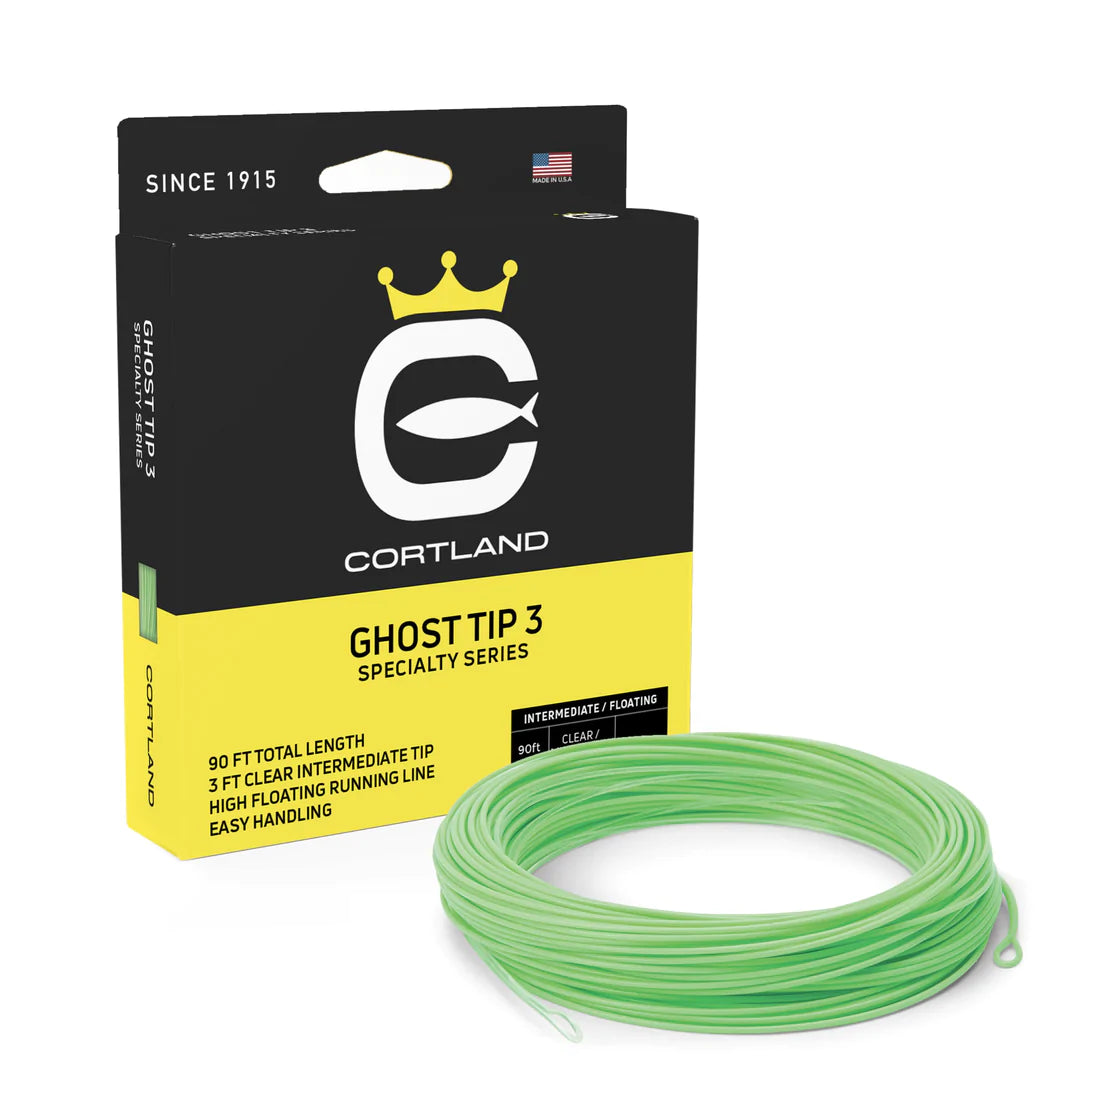 Cortland Specialty Series Ghost Tip 3 Fly Line